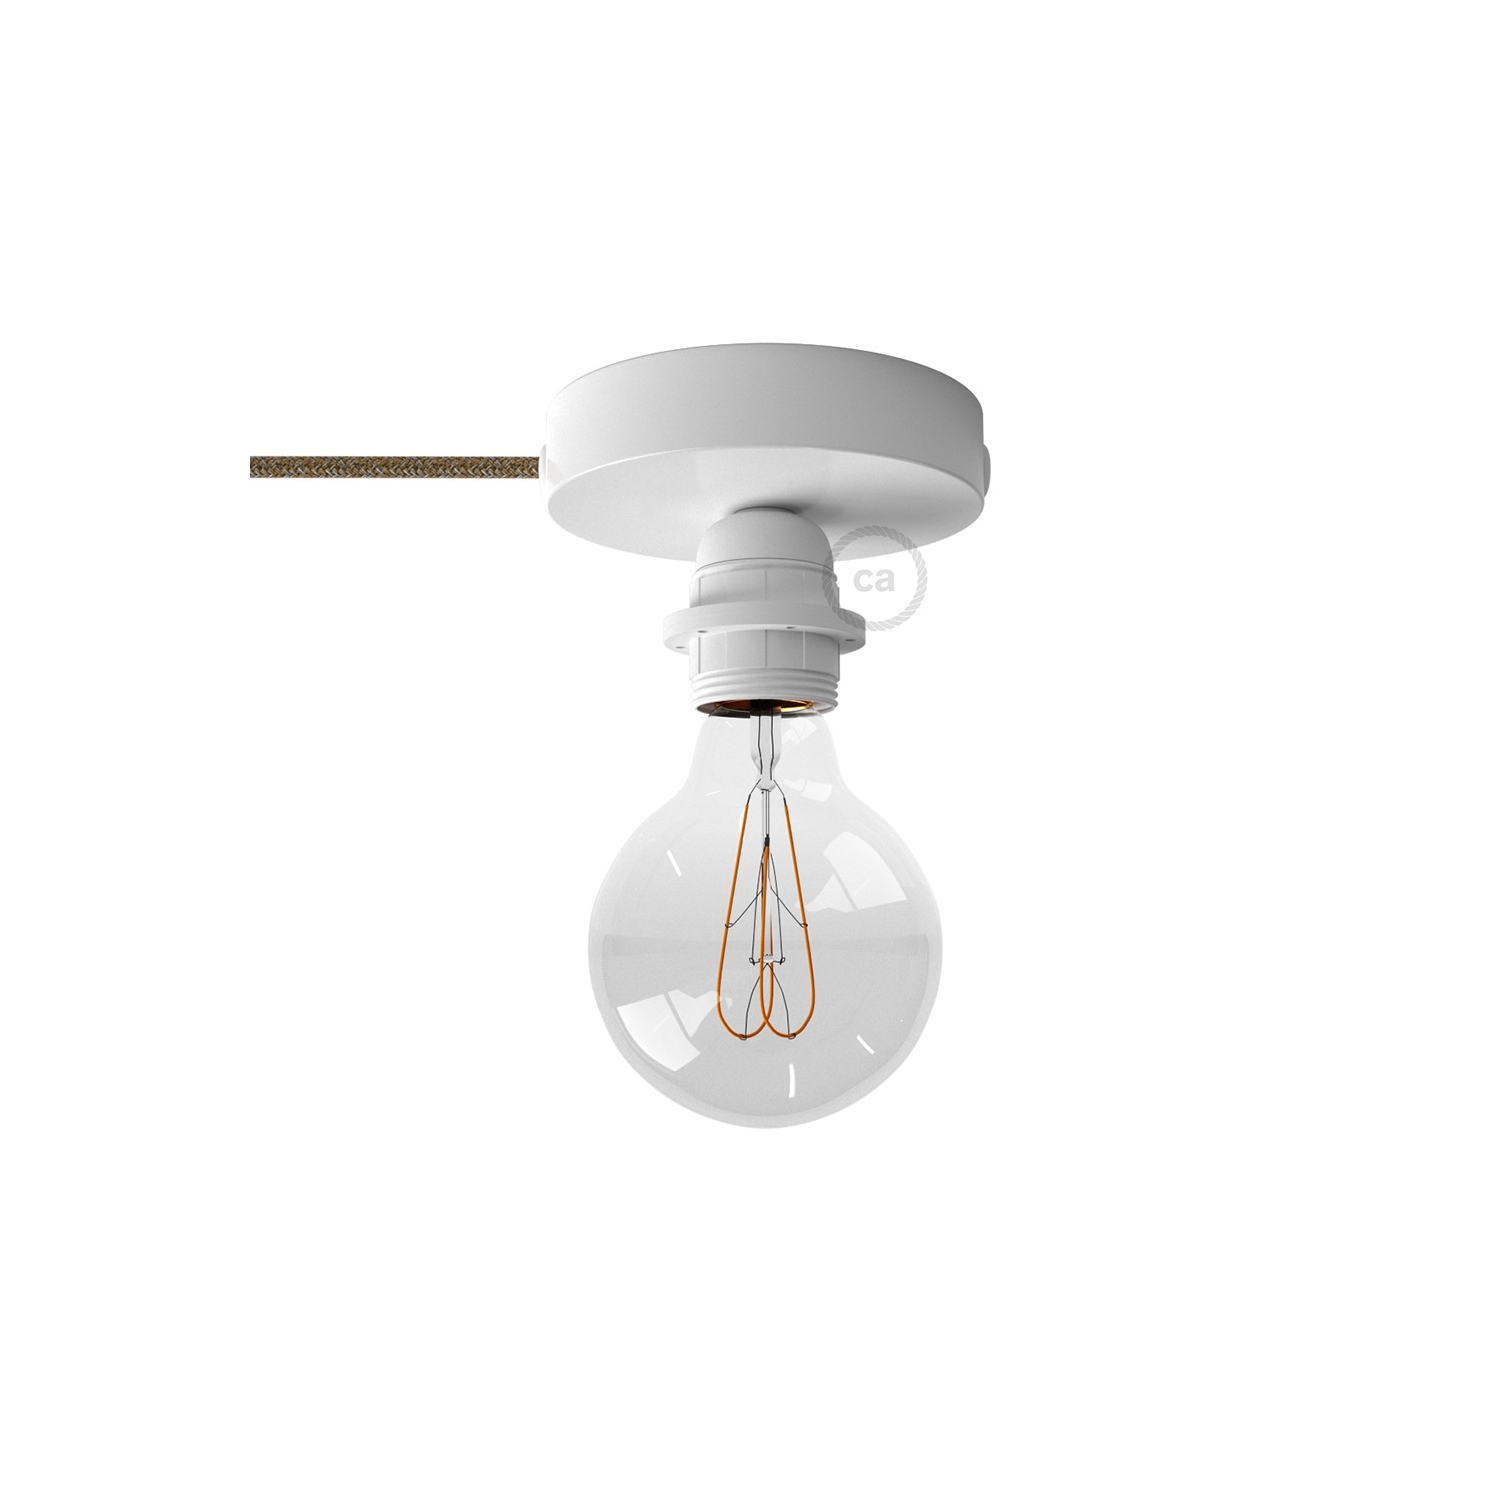 Spostaluce, the white metal light source with E26 threaded socket, fabric cable and side holes